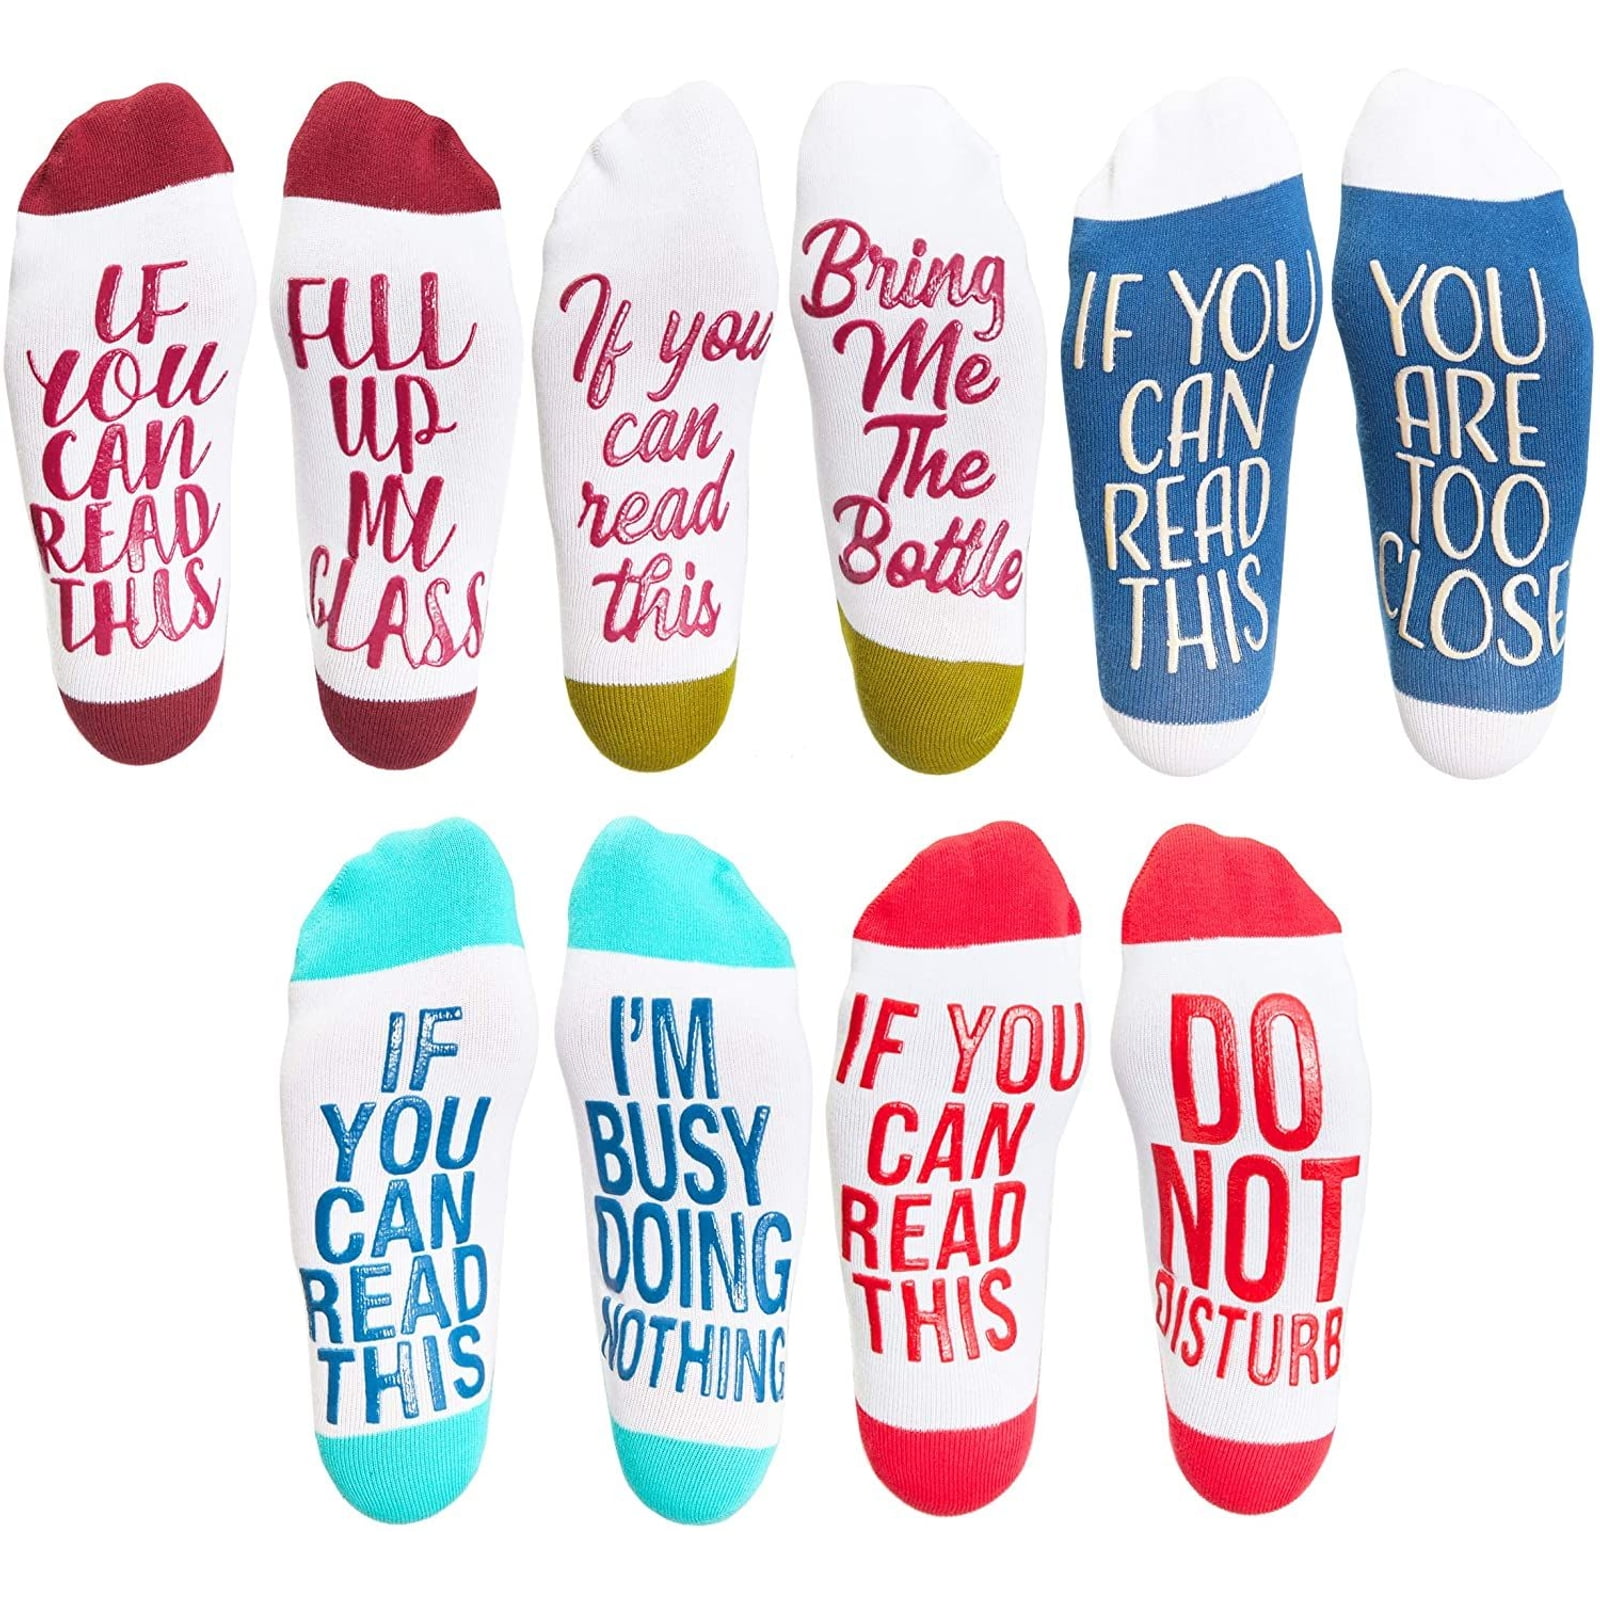 Choose your poison Wrong Type funny socks bring beer Cute little gift for birthday or secret Santa. I'm gaming